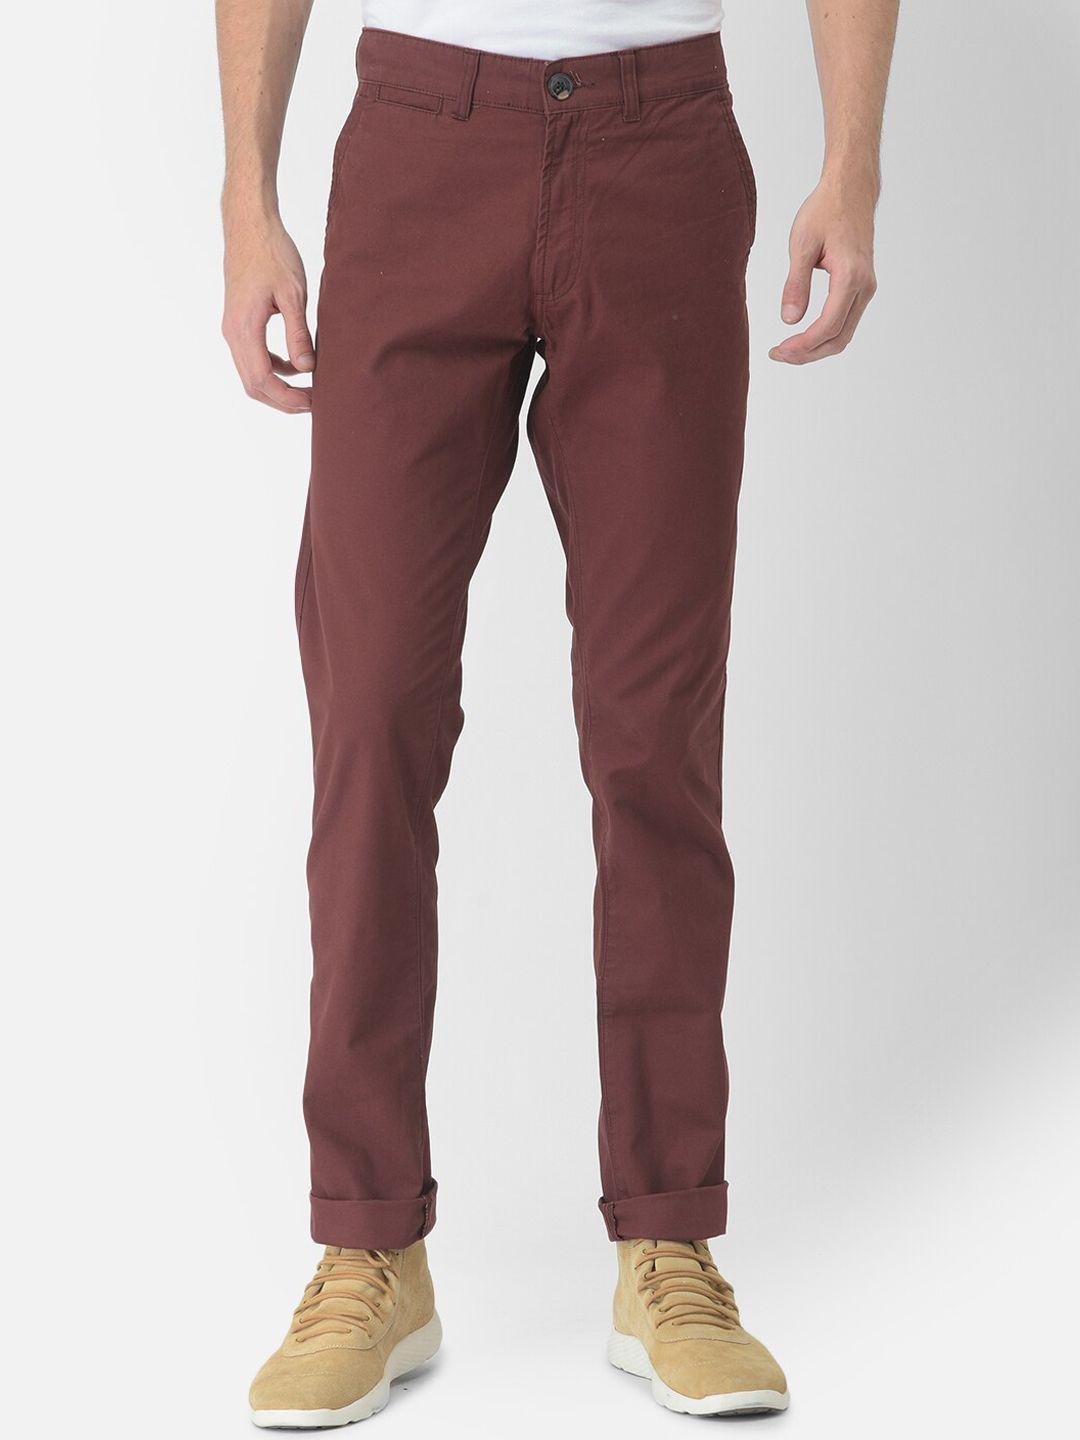 woodland-men-mid-rise-pure-cotton-chinos-trousers